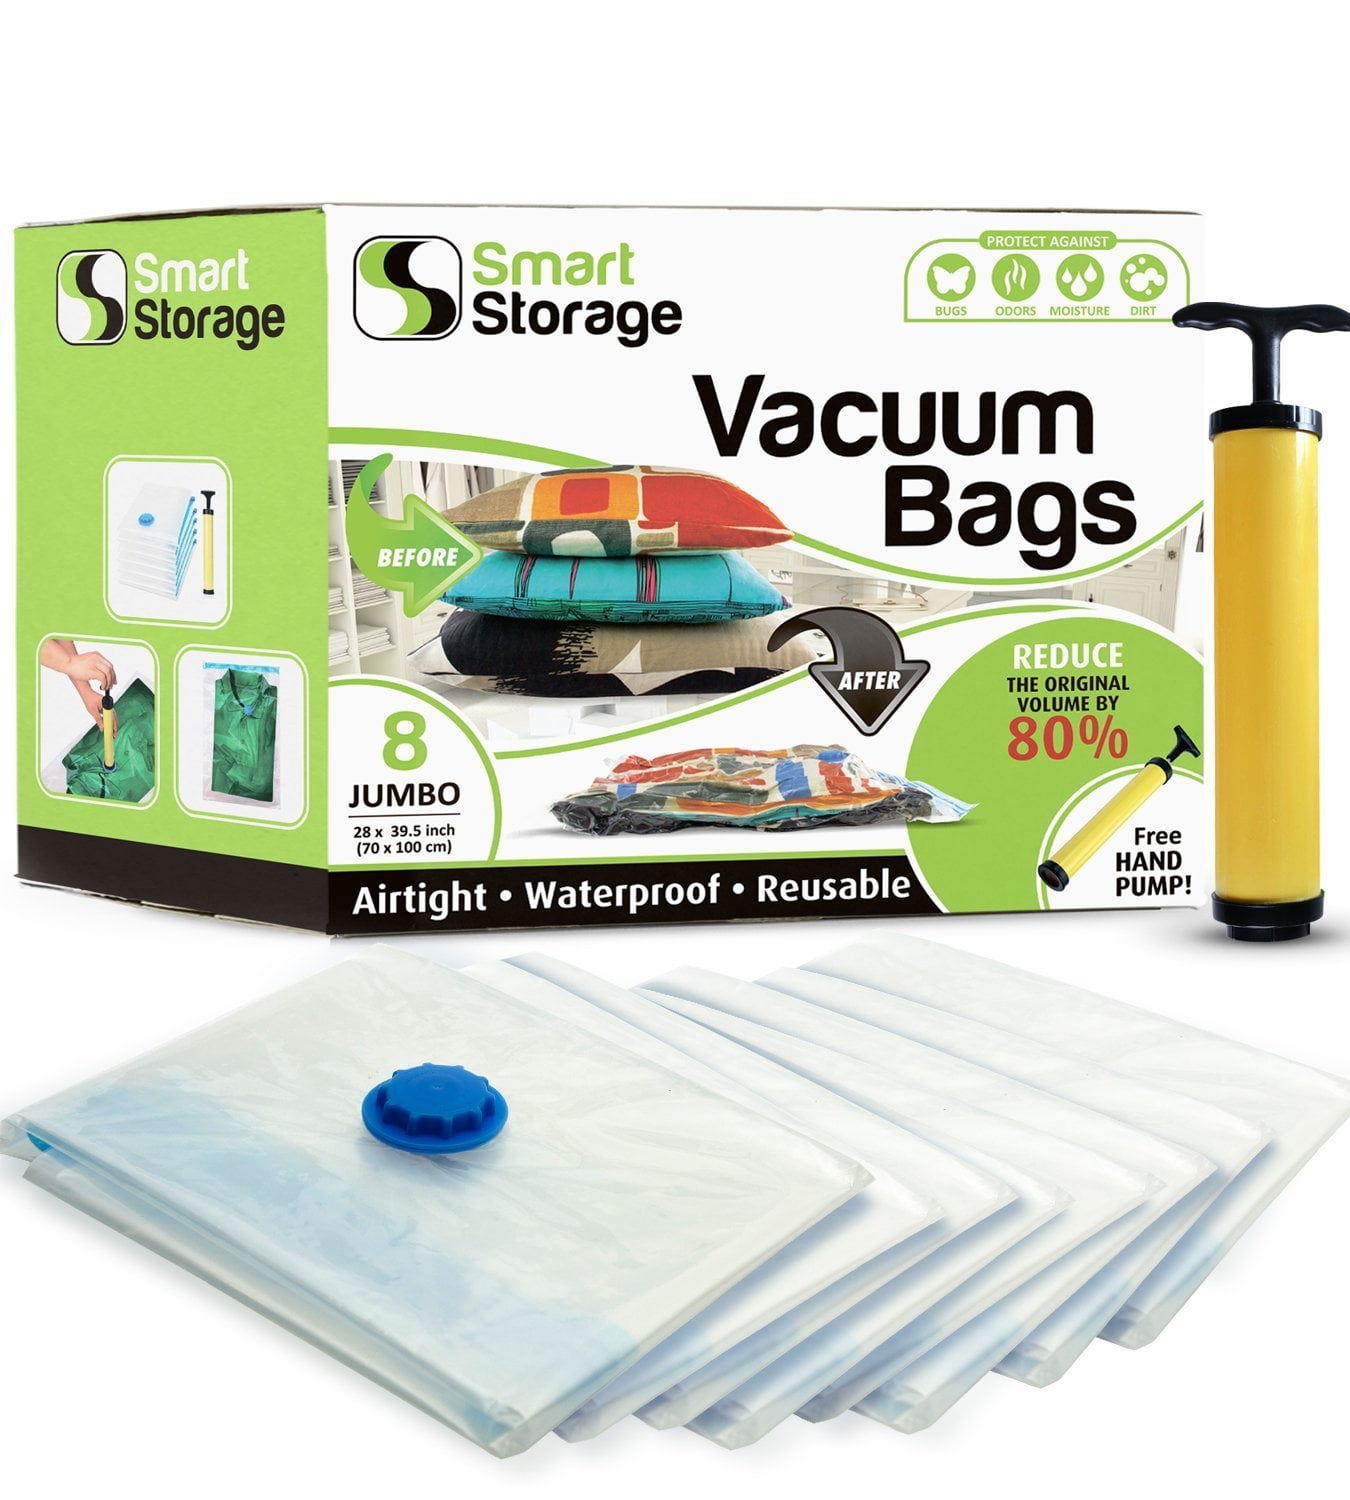 TAILI Cube Vacuum Space Saver Bags Jumbo Size 4 Pack of 31x40x15 inch Extra and